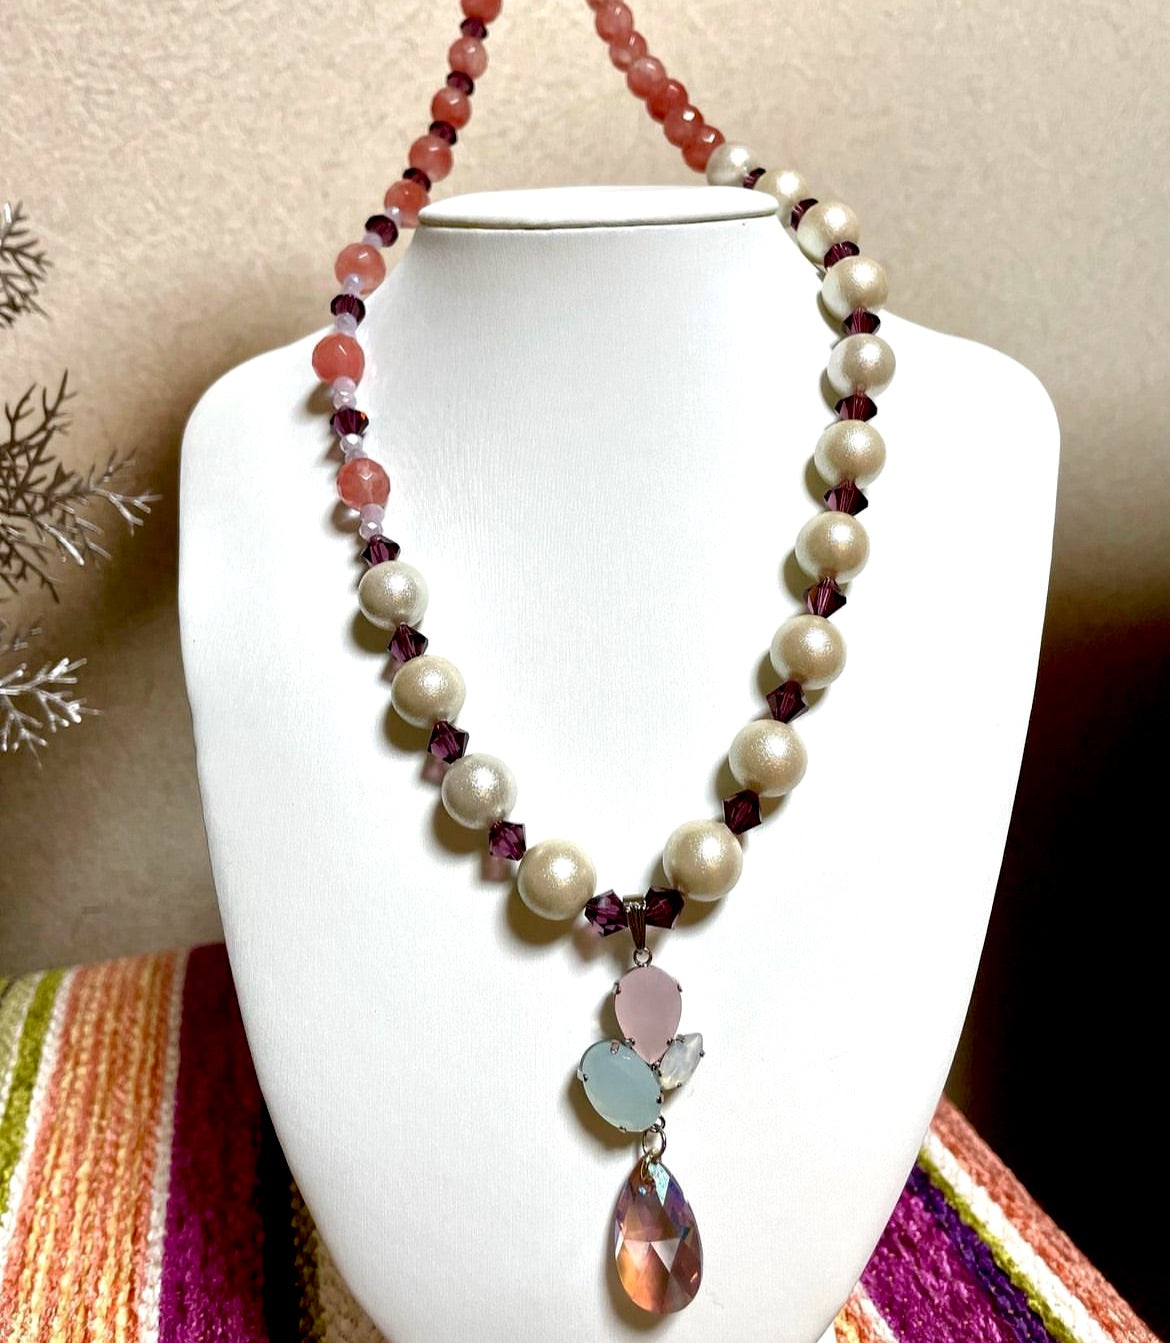 Pearls beads crystals necklace with pendant